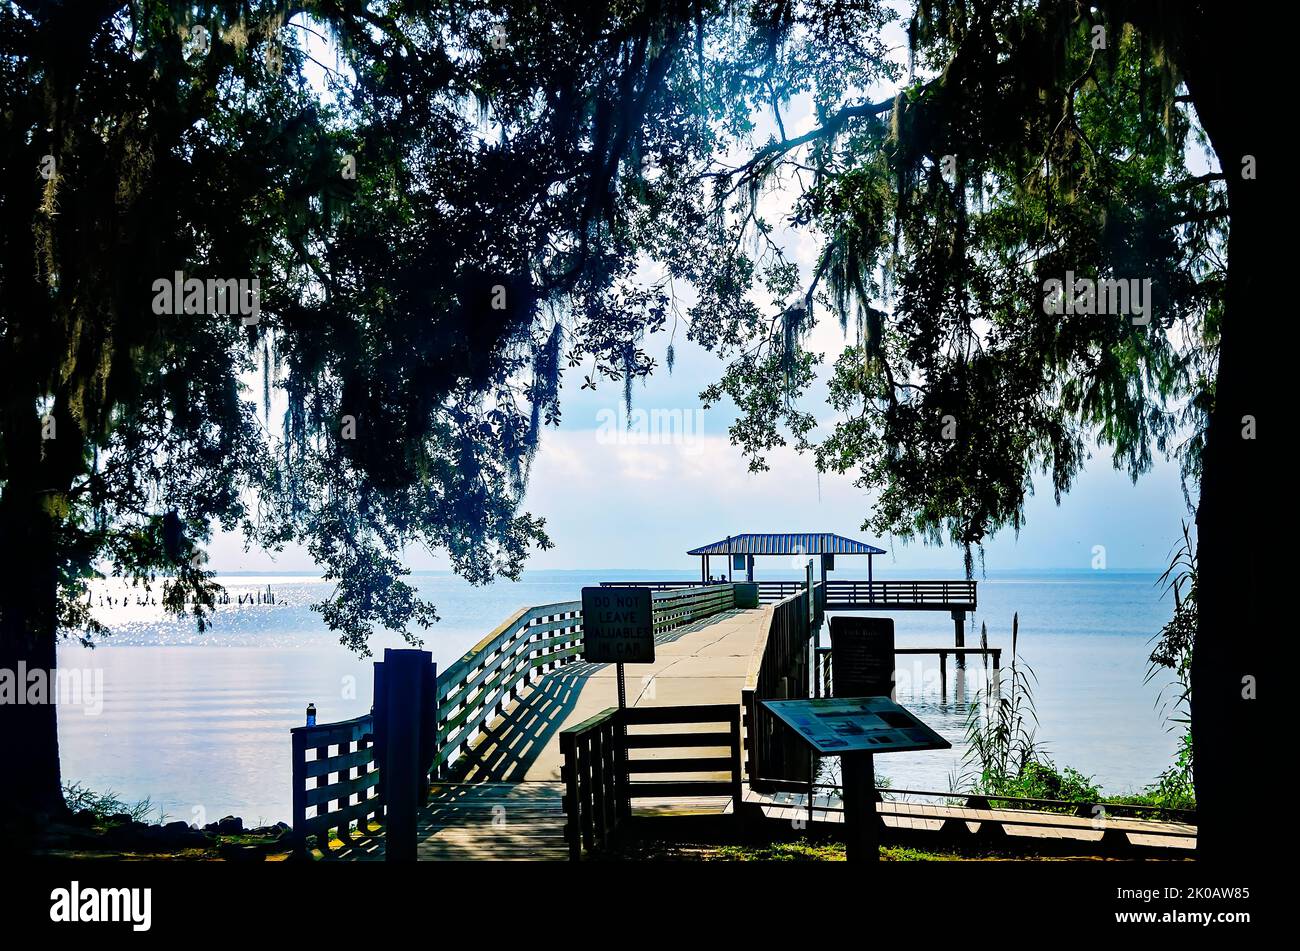 The May Day Park pier offers a view of Mobile Bay, Sept. 8, 2022, in Daphne, Alabama. The park was founded in 1887 and is one of 13 parks in Daphne. Stock Photo